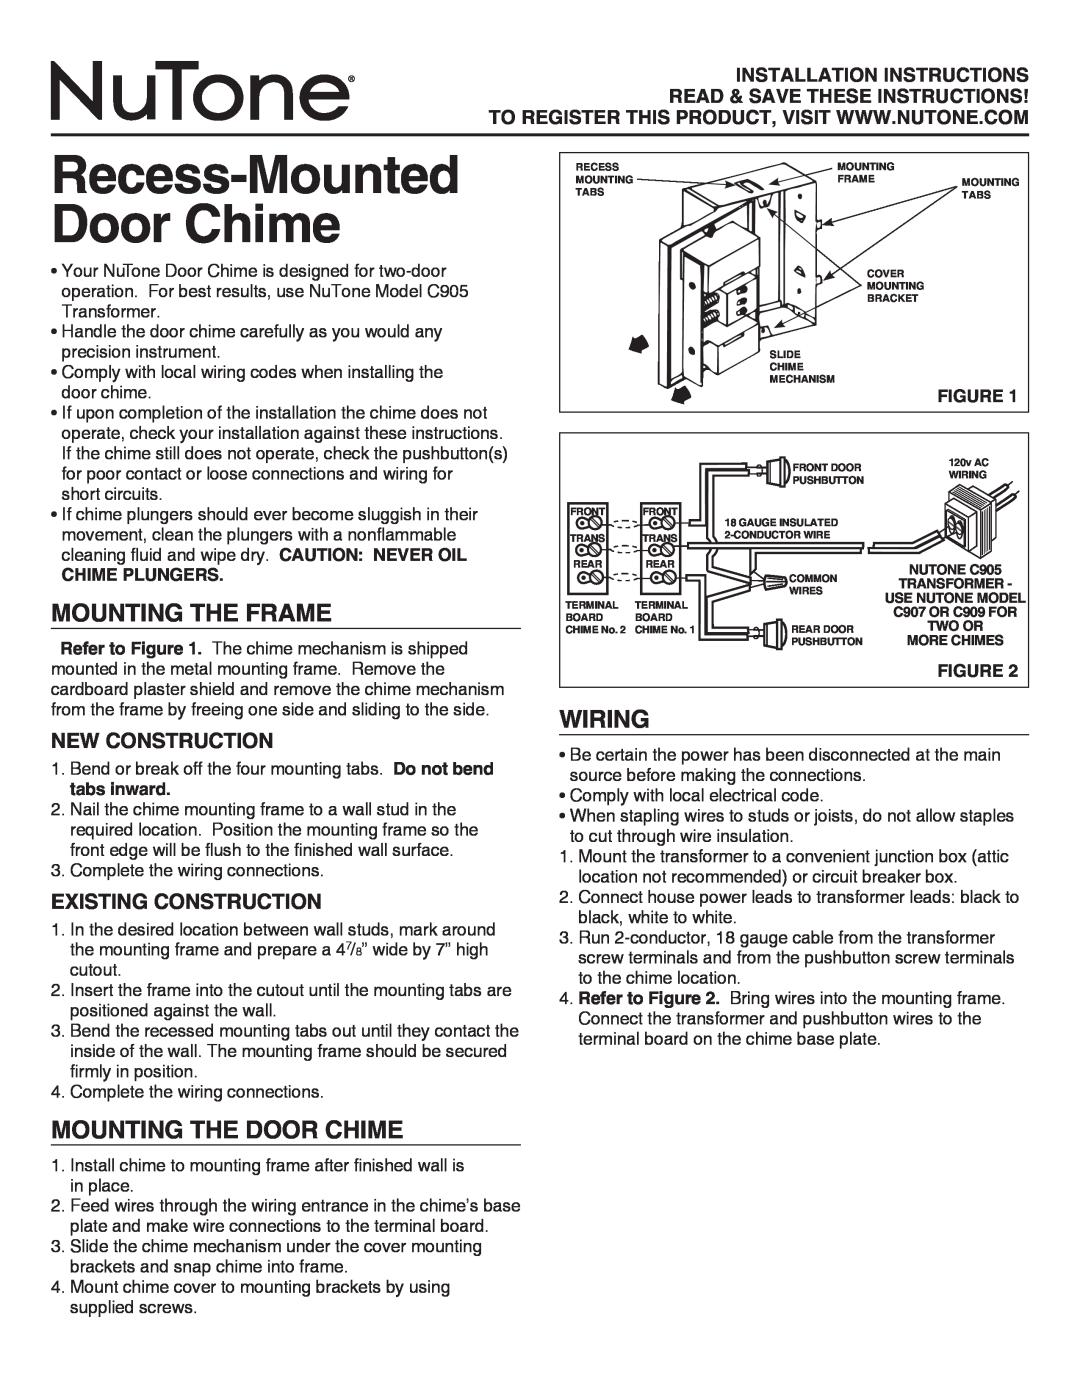 NuTone LA14WH installation instructions Mounting The Frame, Wiring, Mounting The Door Chime, New Construction 